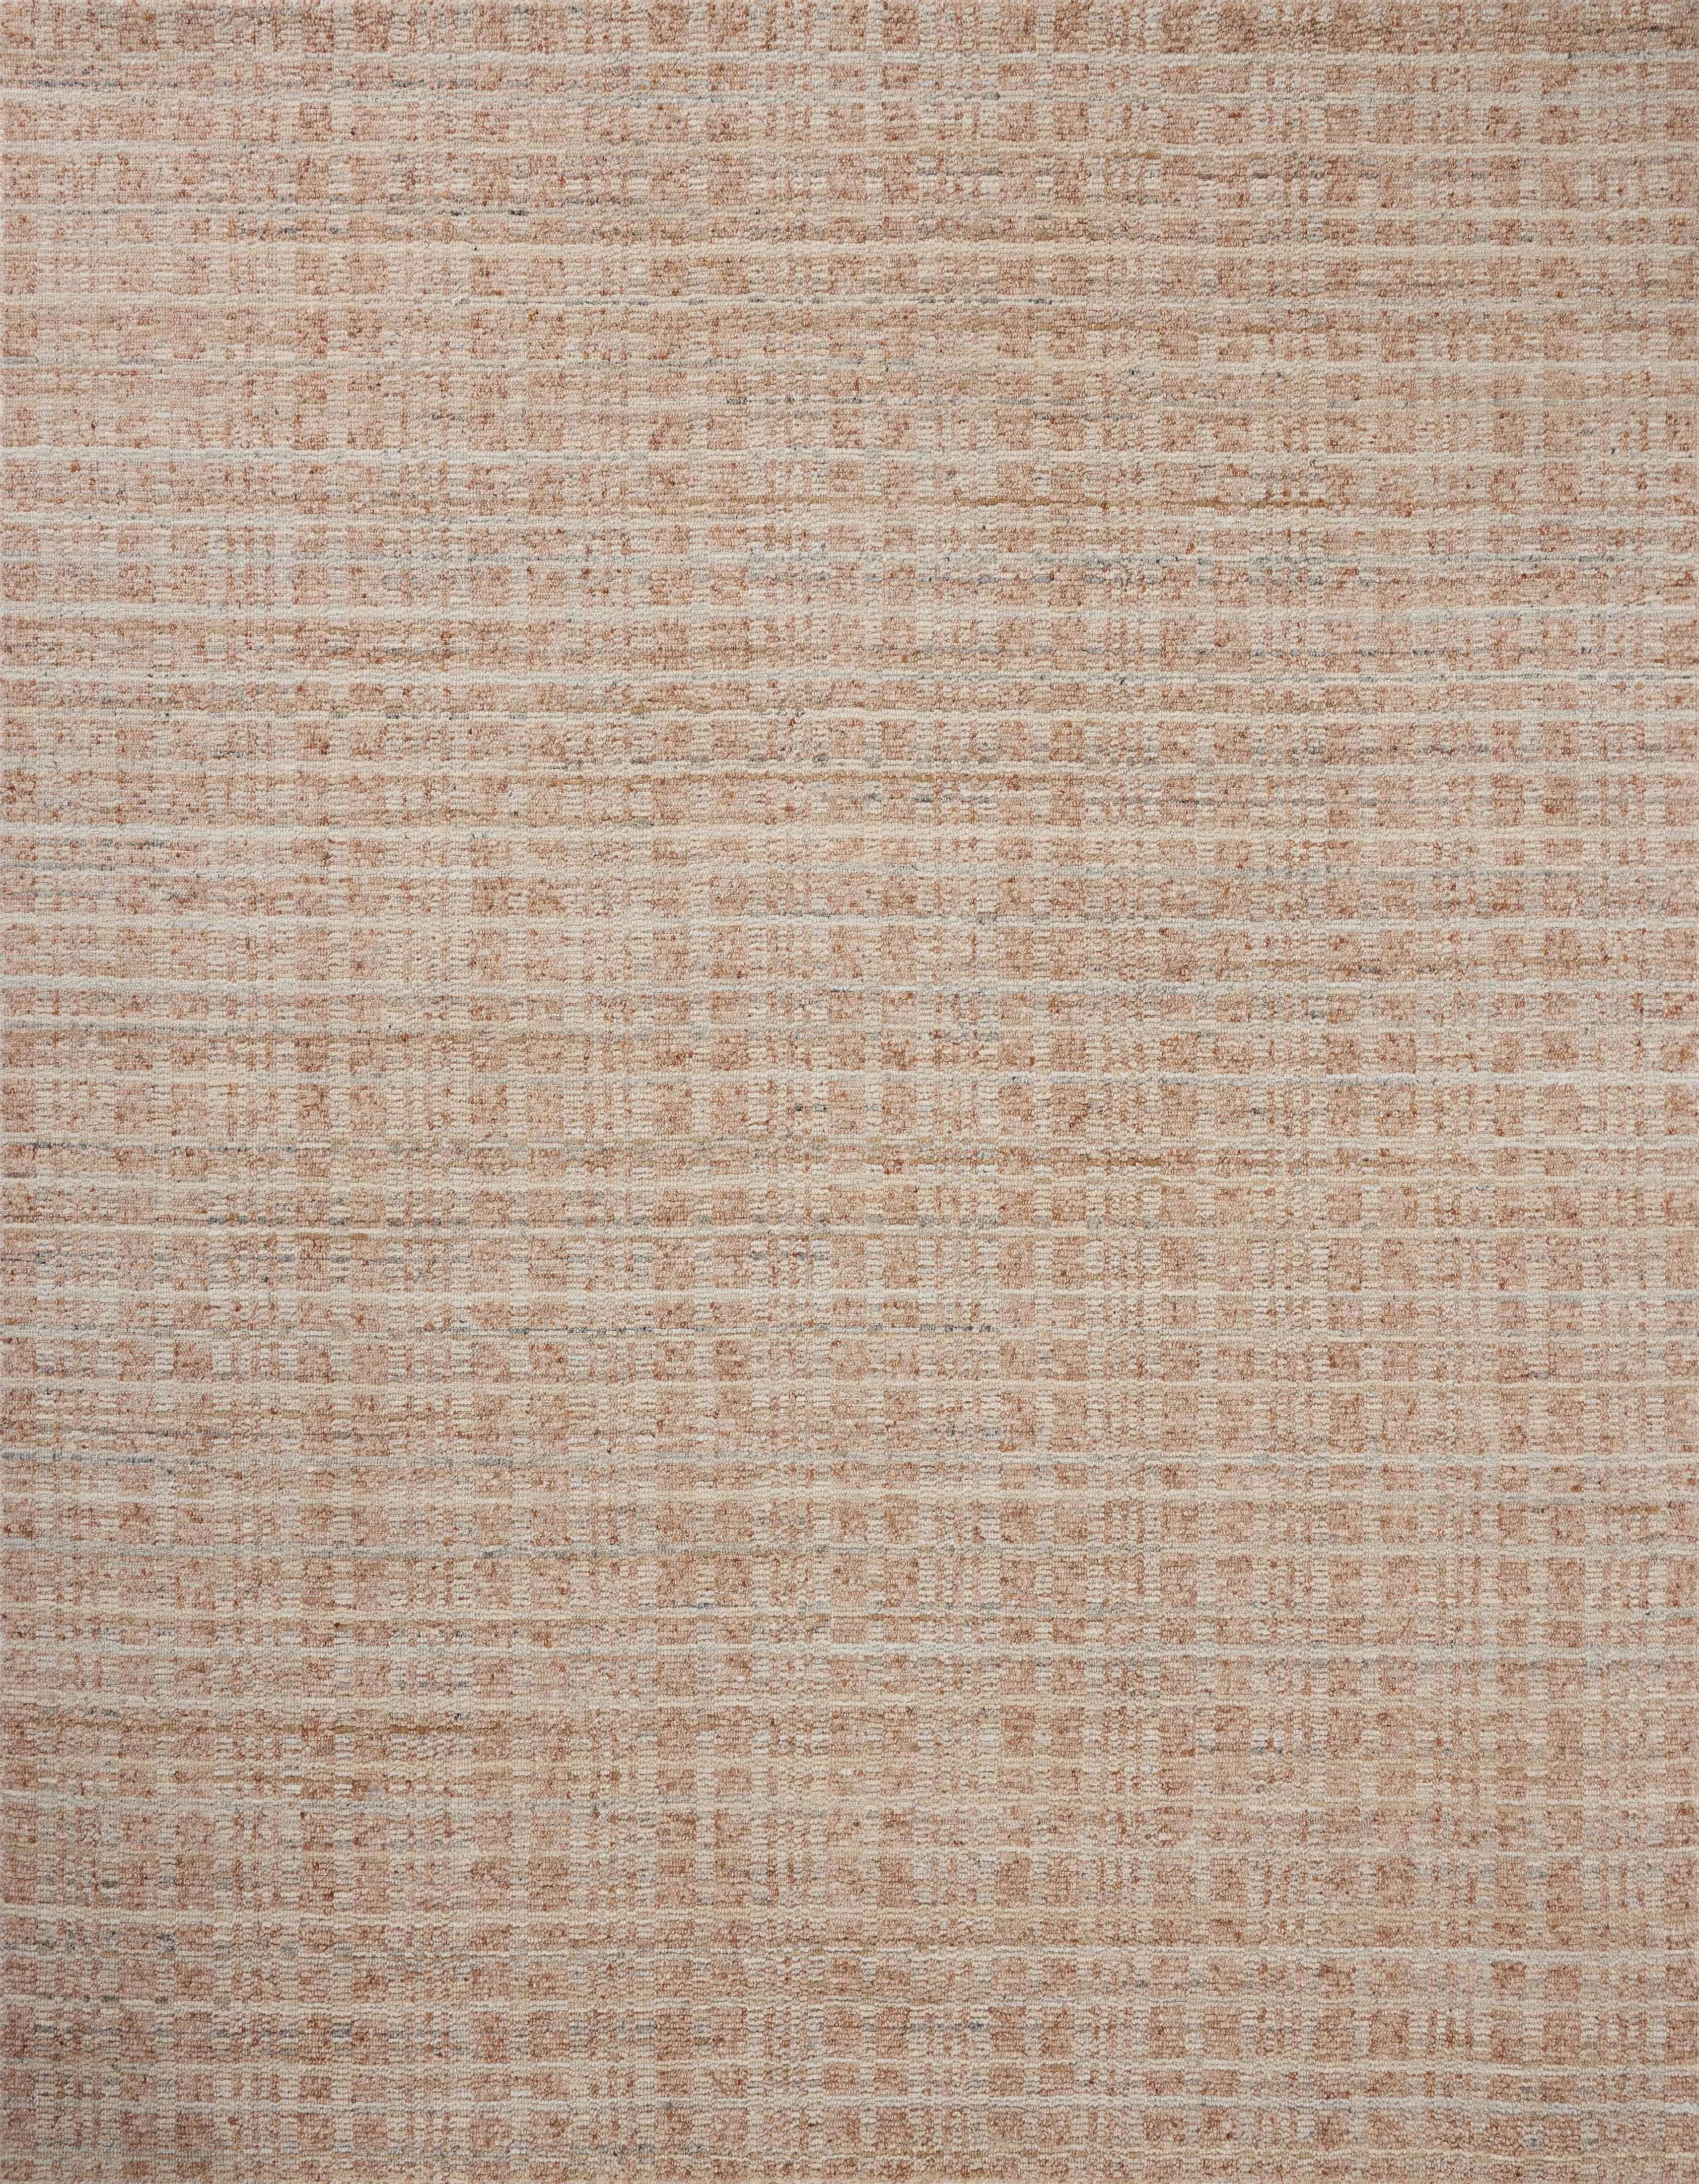 The Sonya Terracotta / Natural Rug is a hand-loomed area rug with a light, airy palette and understated graphic design. The rug’s textural pile is a soft blend of wool and nylon that creates dimension in living rooms, bedrooms, and more. Amethyst Home provides interior design, new home construction design consulting, vintage area rugs, and lighting in the Houston metro area.